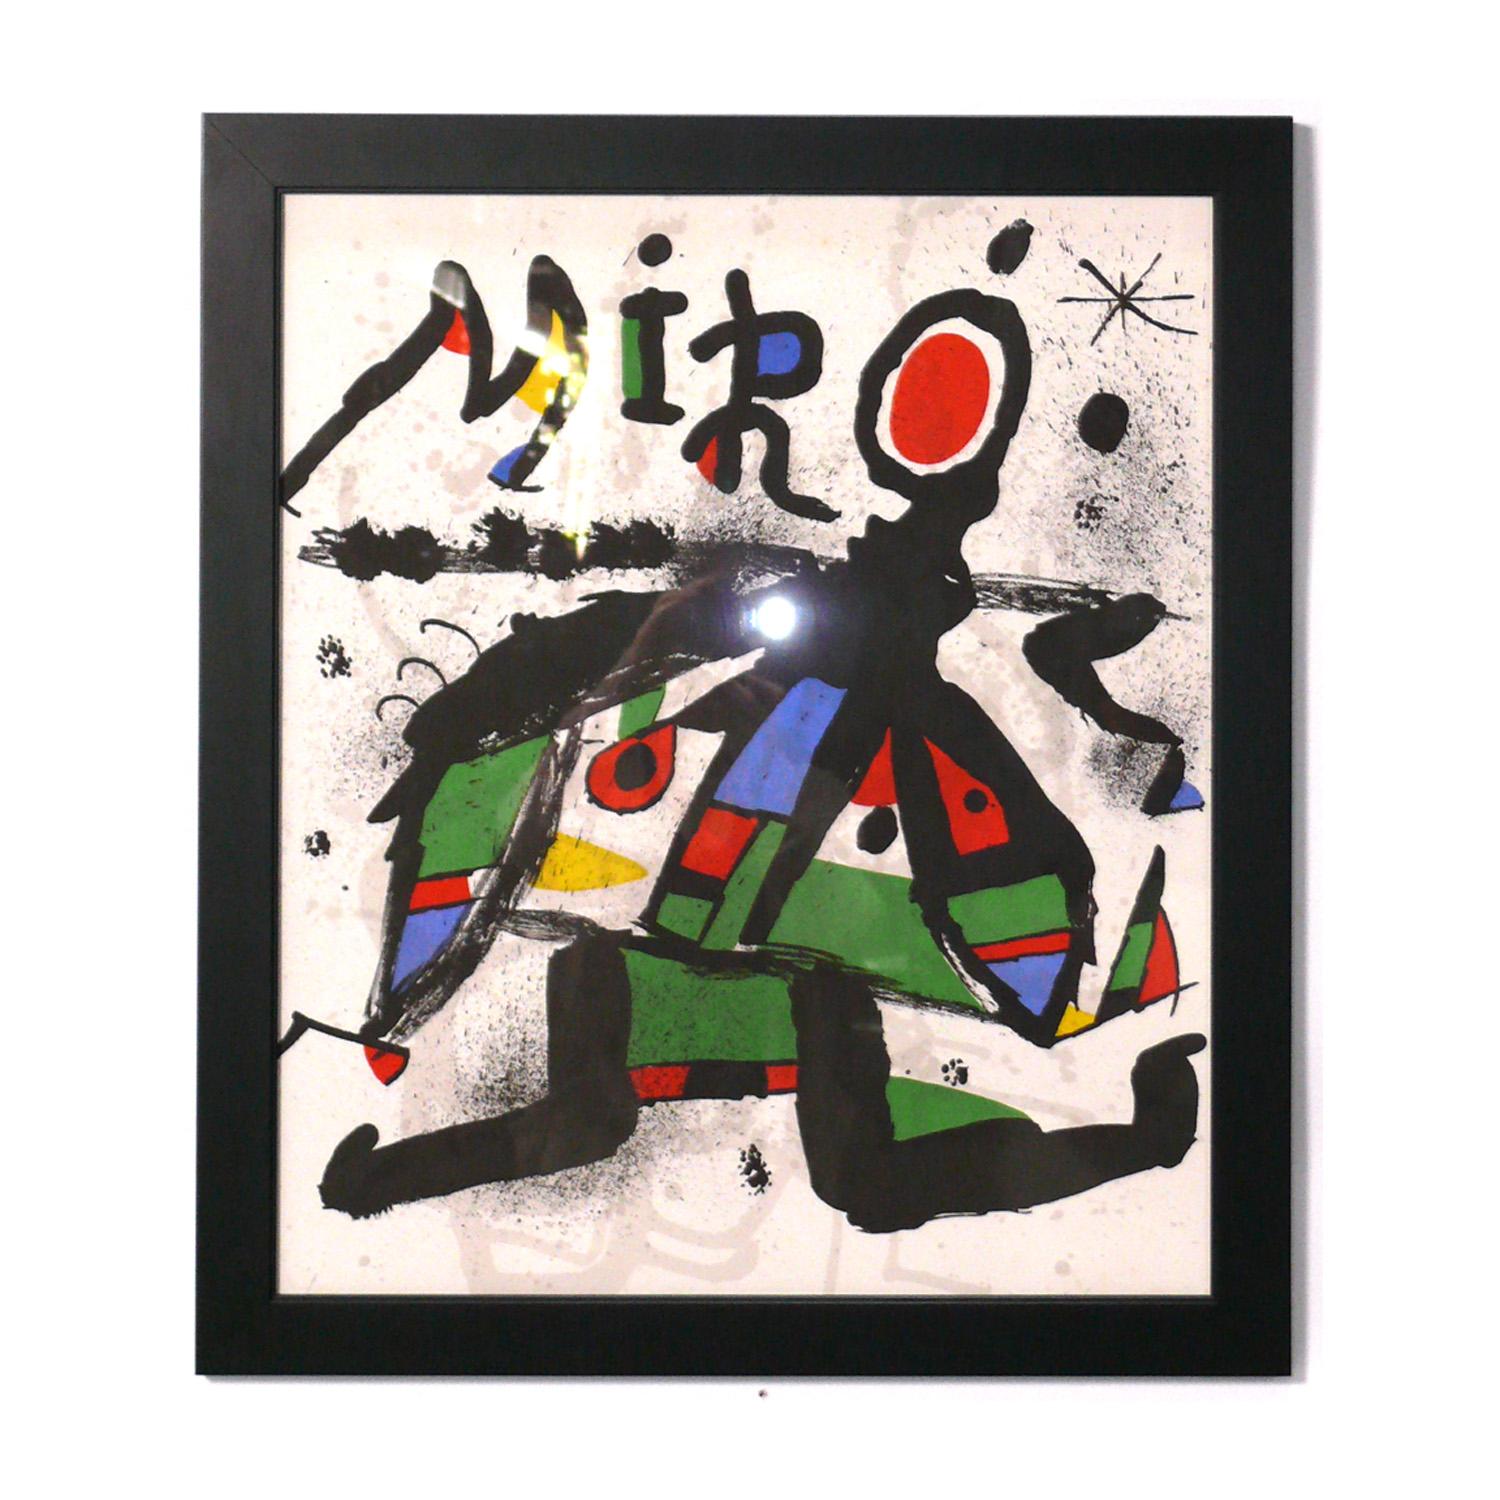 Selection of Joan Miro Color Screenprints, French, circa 1960s. They are priced at $650 each or $1500 for all three. They have recently been professionally framed in clean lined black lacquer gallery frames under UV resistant glass. The print in the